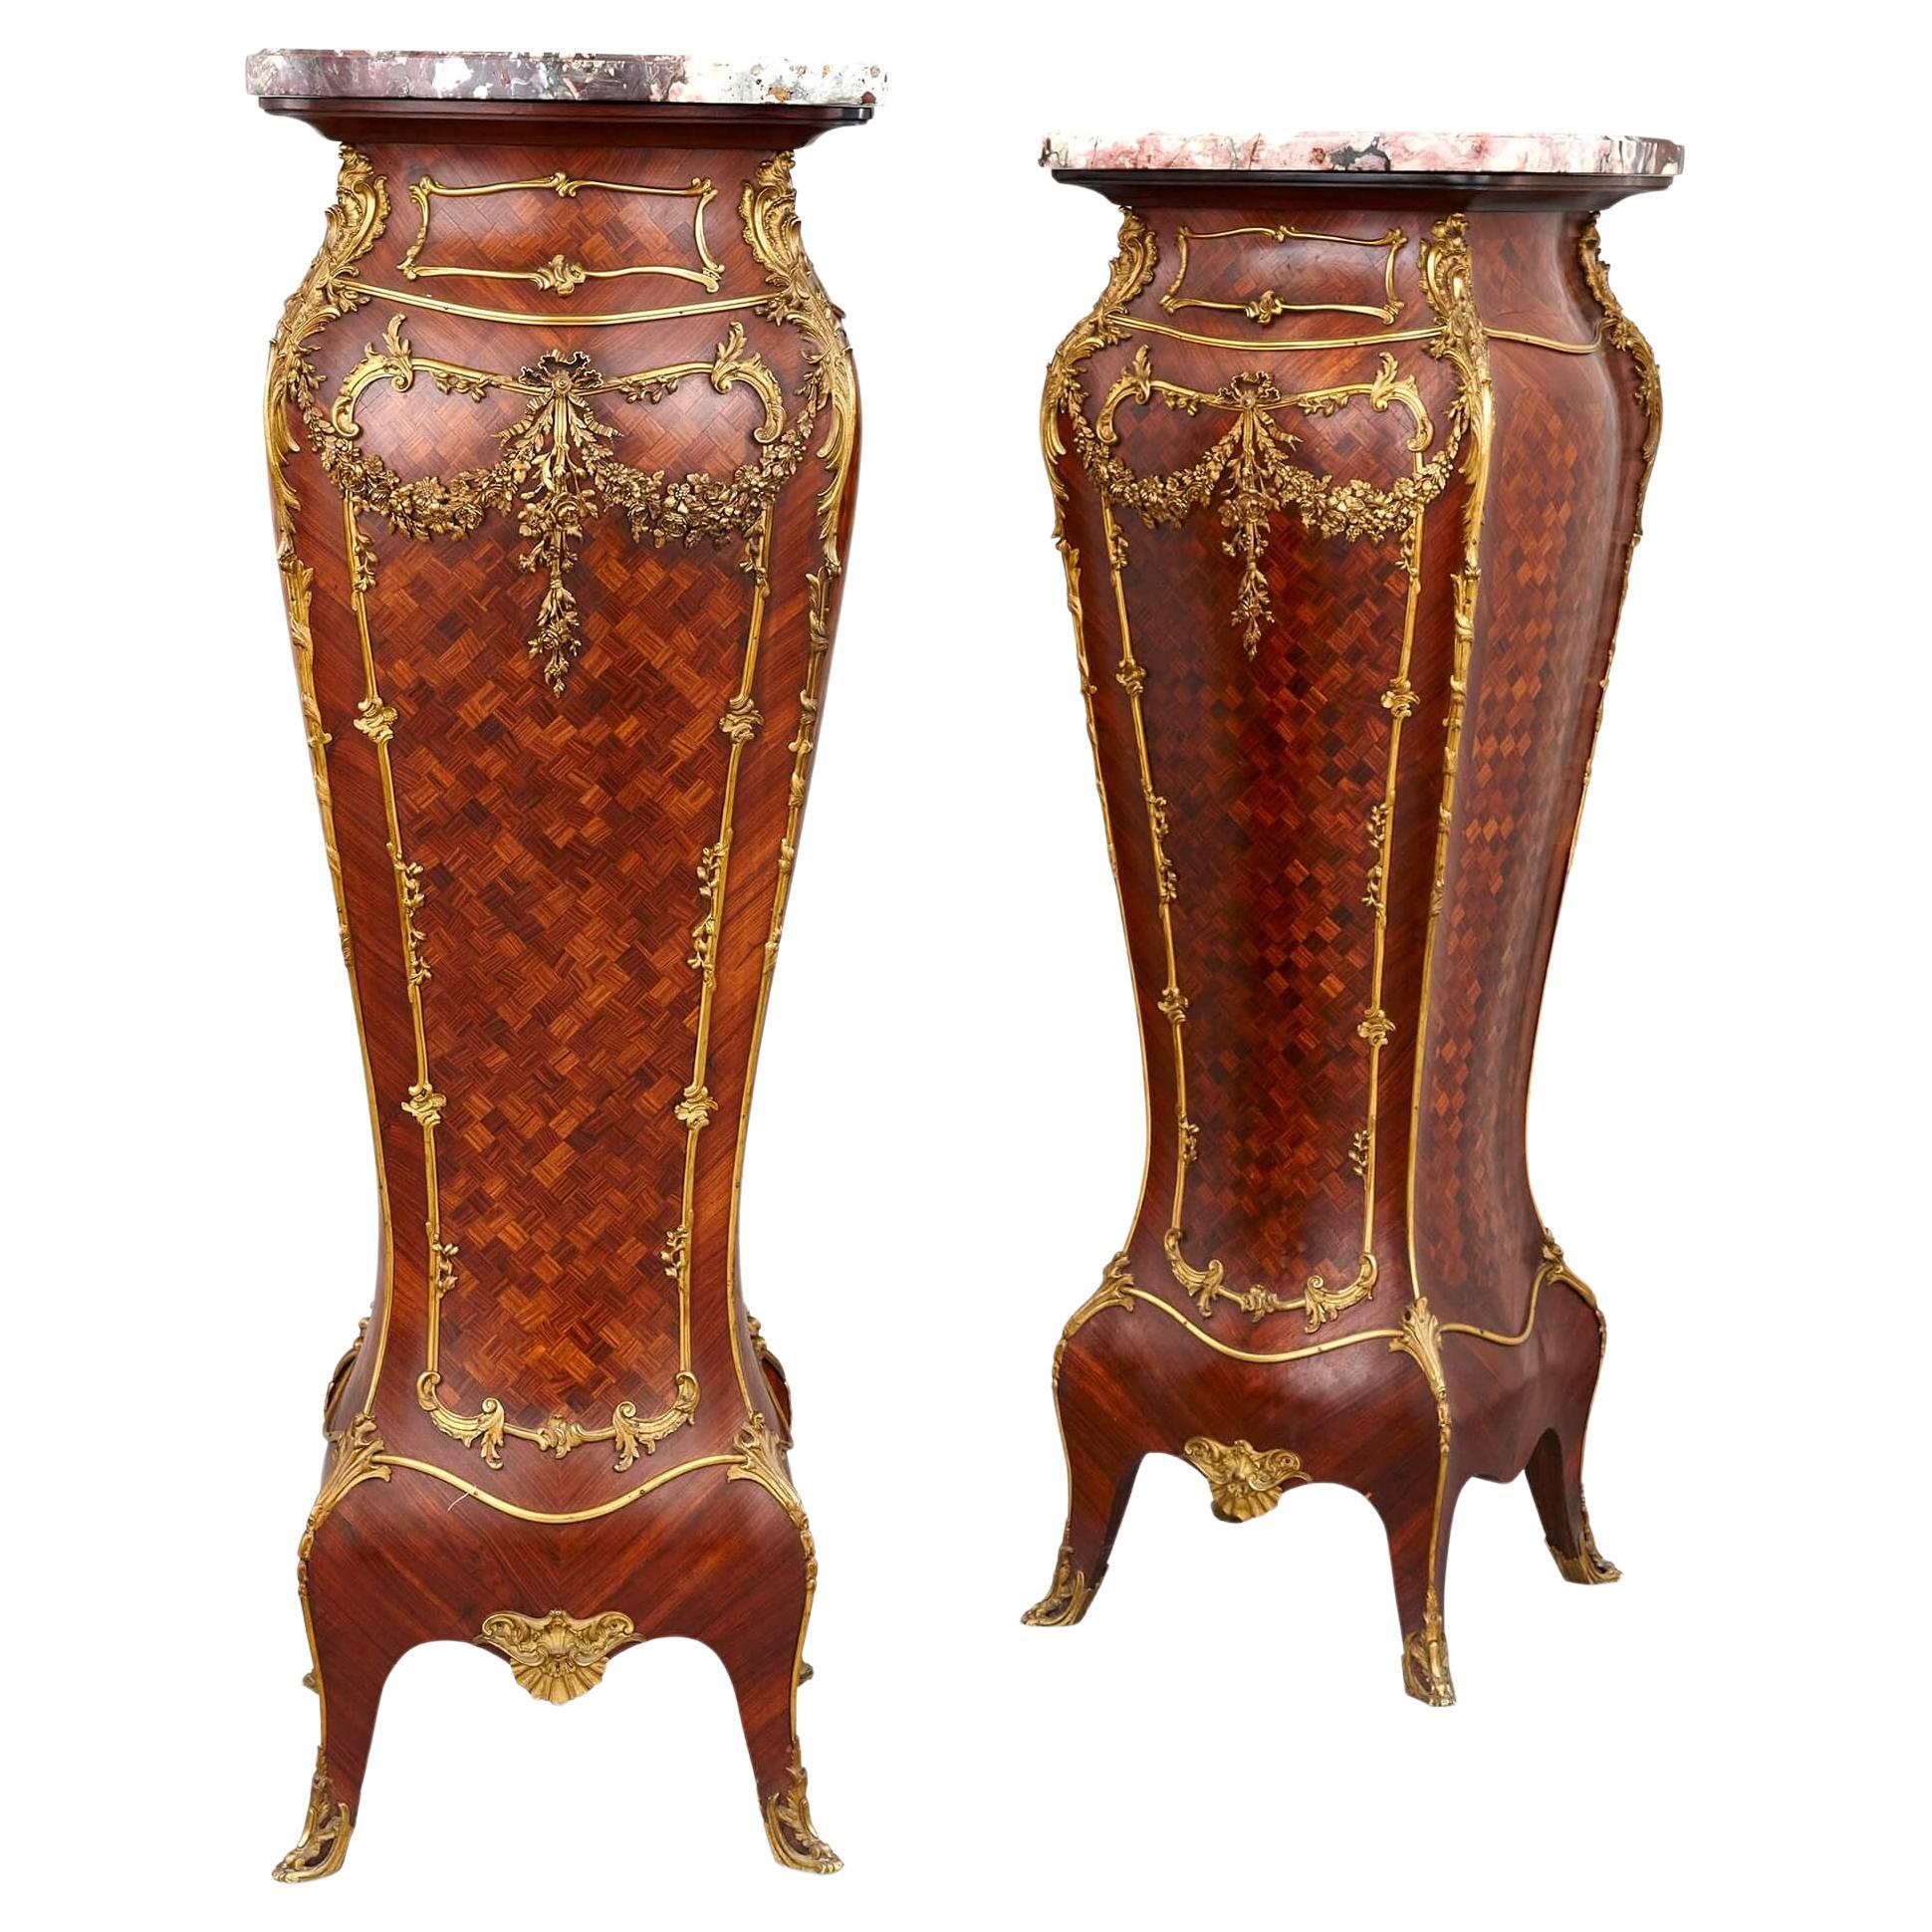 Pair of Gilt-Bronze, Parquetry and Marble Pedestal by Alexandre Hugnet, Paris For Sale